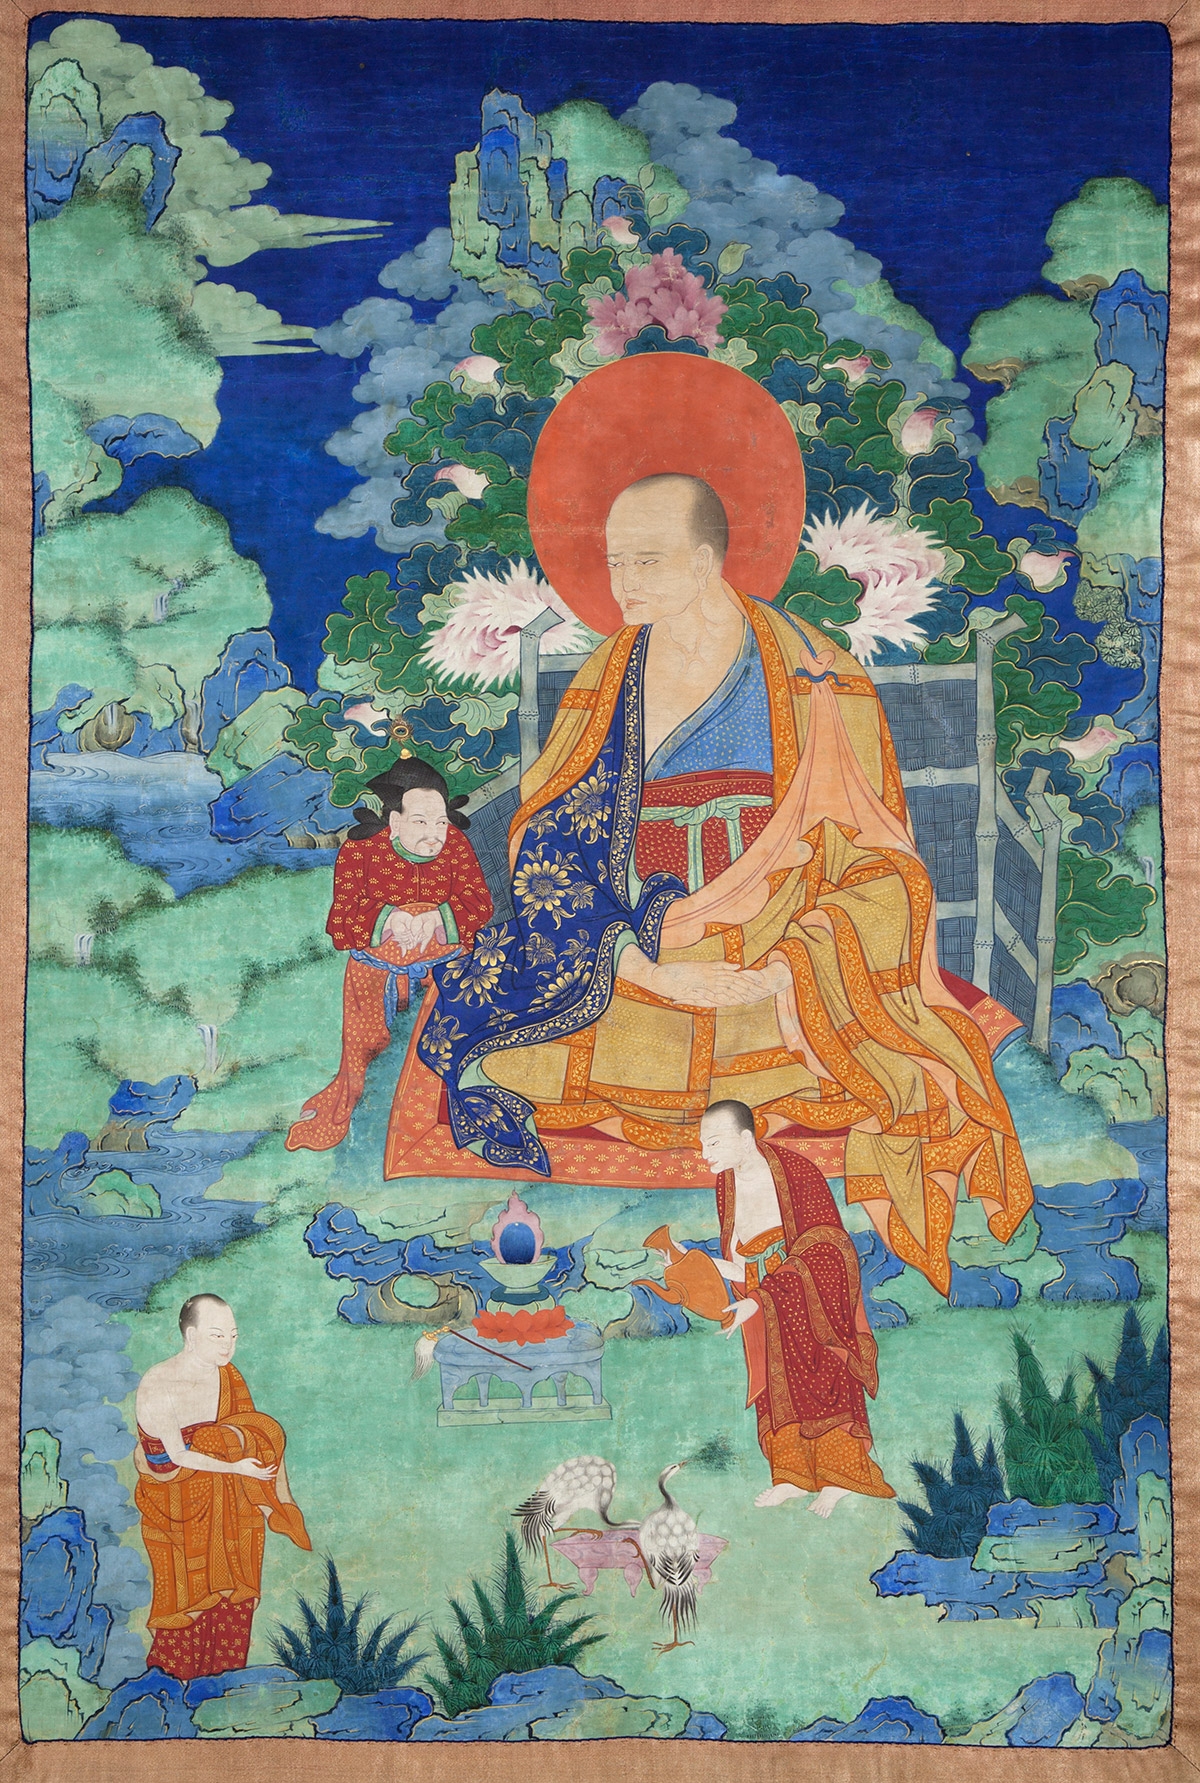 Kanakabharadvaja Arhat. 17th century. Possibly Kham (East Tibet). Tradition: Gelug. Pigments on cloth. MU-CIV/MAO "Giuseppe Tucci," inv. 927/760. Placement as indicated on verso: 3rd from left. Image courtesy of the Museum of Civilisation/Museum of Oriental Art "Giuseppe Tucci," Rome.